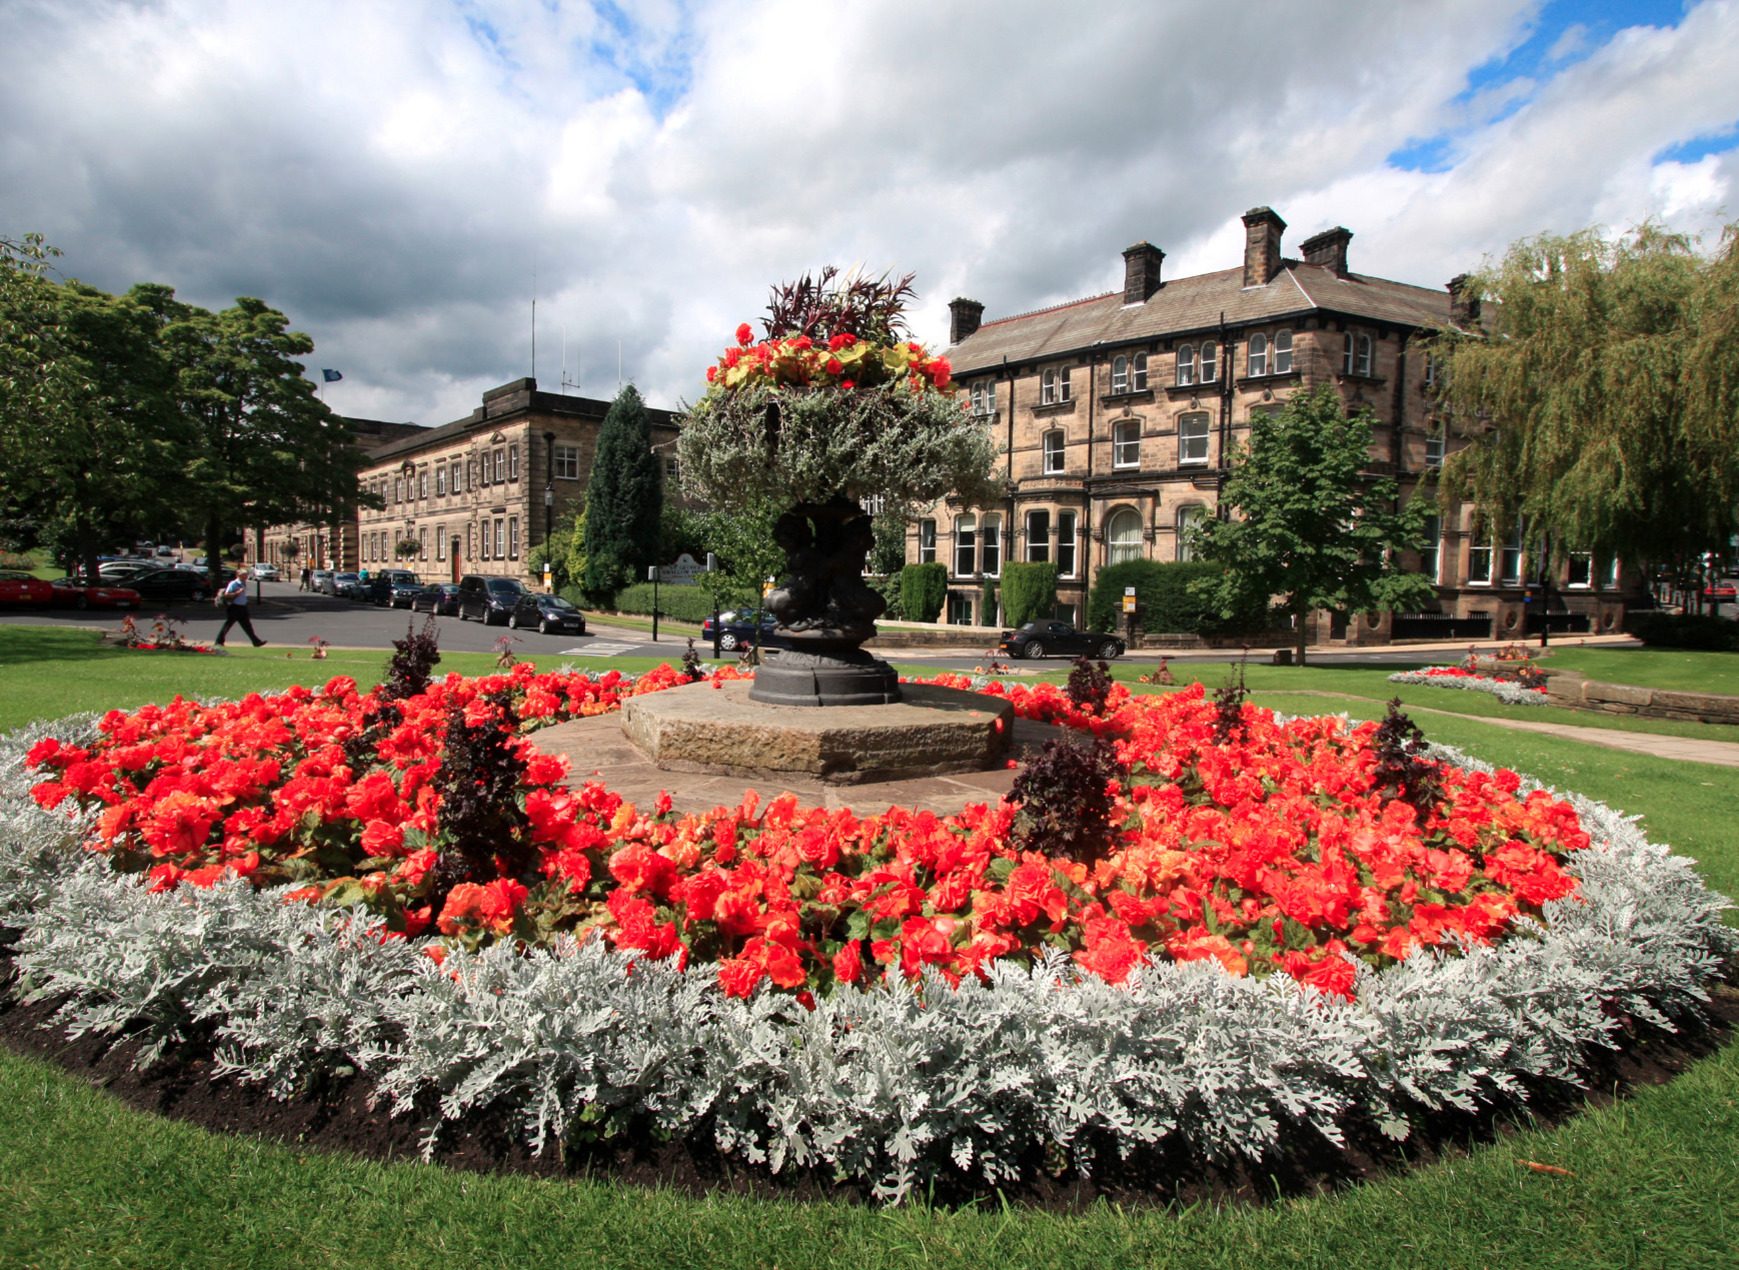 crescent gardens harrogate outside the royal baths chinese restaurant and the george hotel and the conference centre